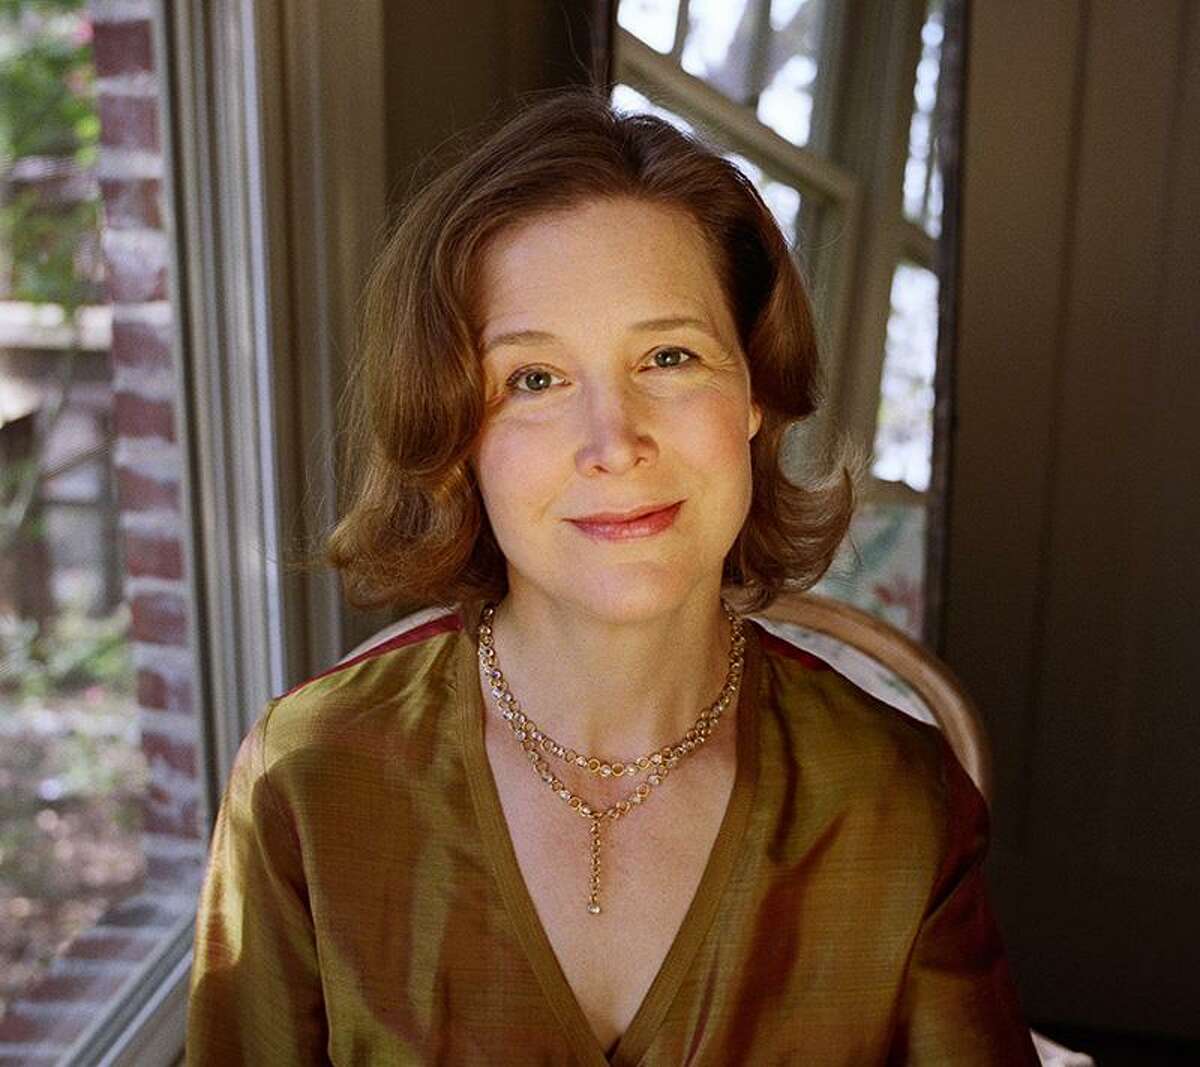 Ann Patchett, author of the best seller “Bel Canto,” is a finalist for this year’s National Book Critics Circle Award for fiction for her latest novel “Commonwealth.”